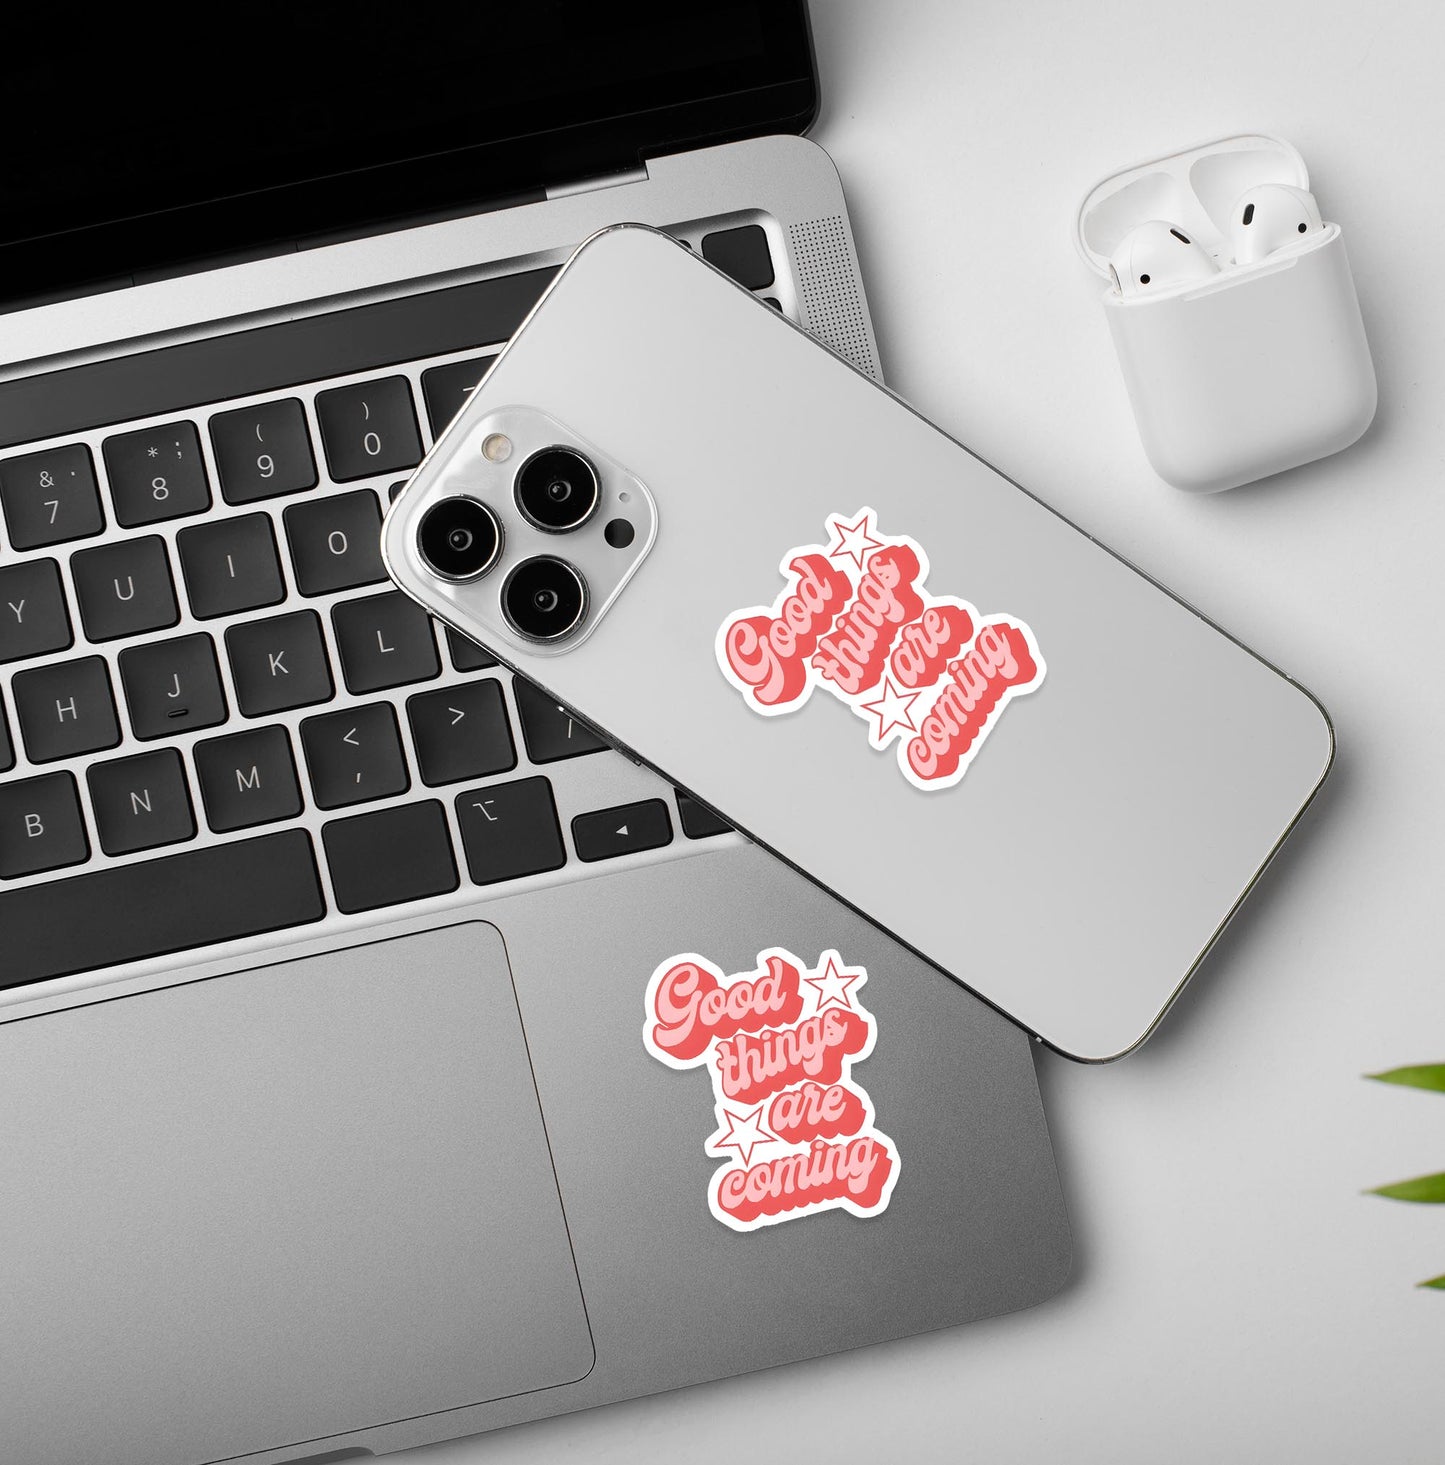 Good Things Are Coming - Laptop & Mobile Stickers